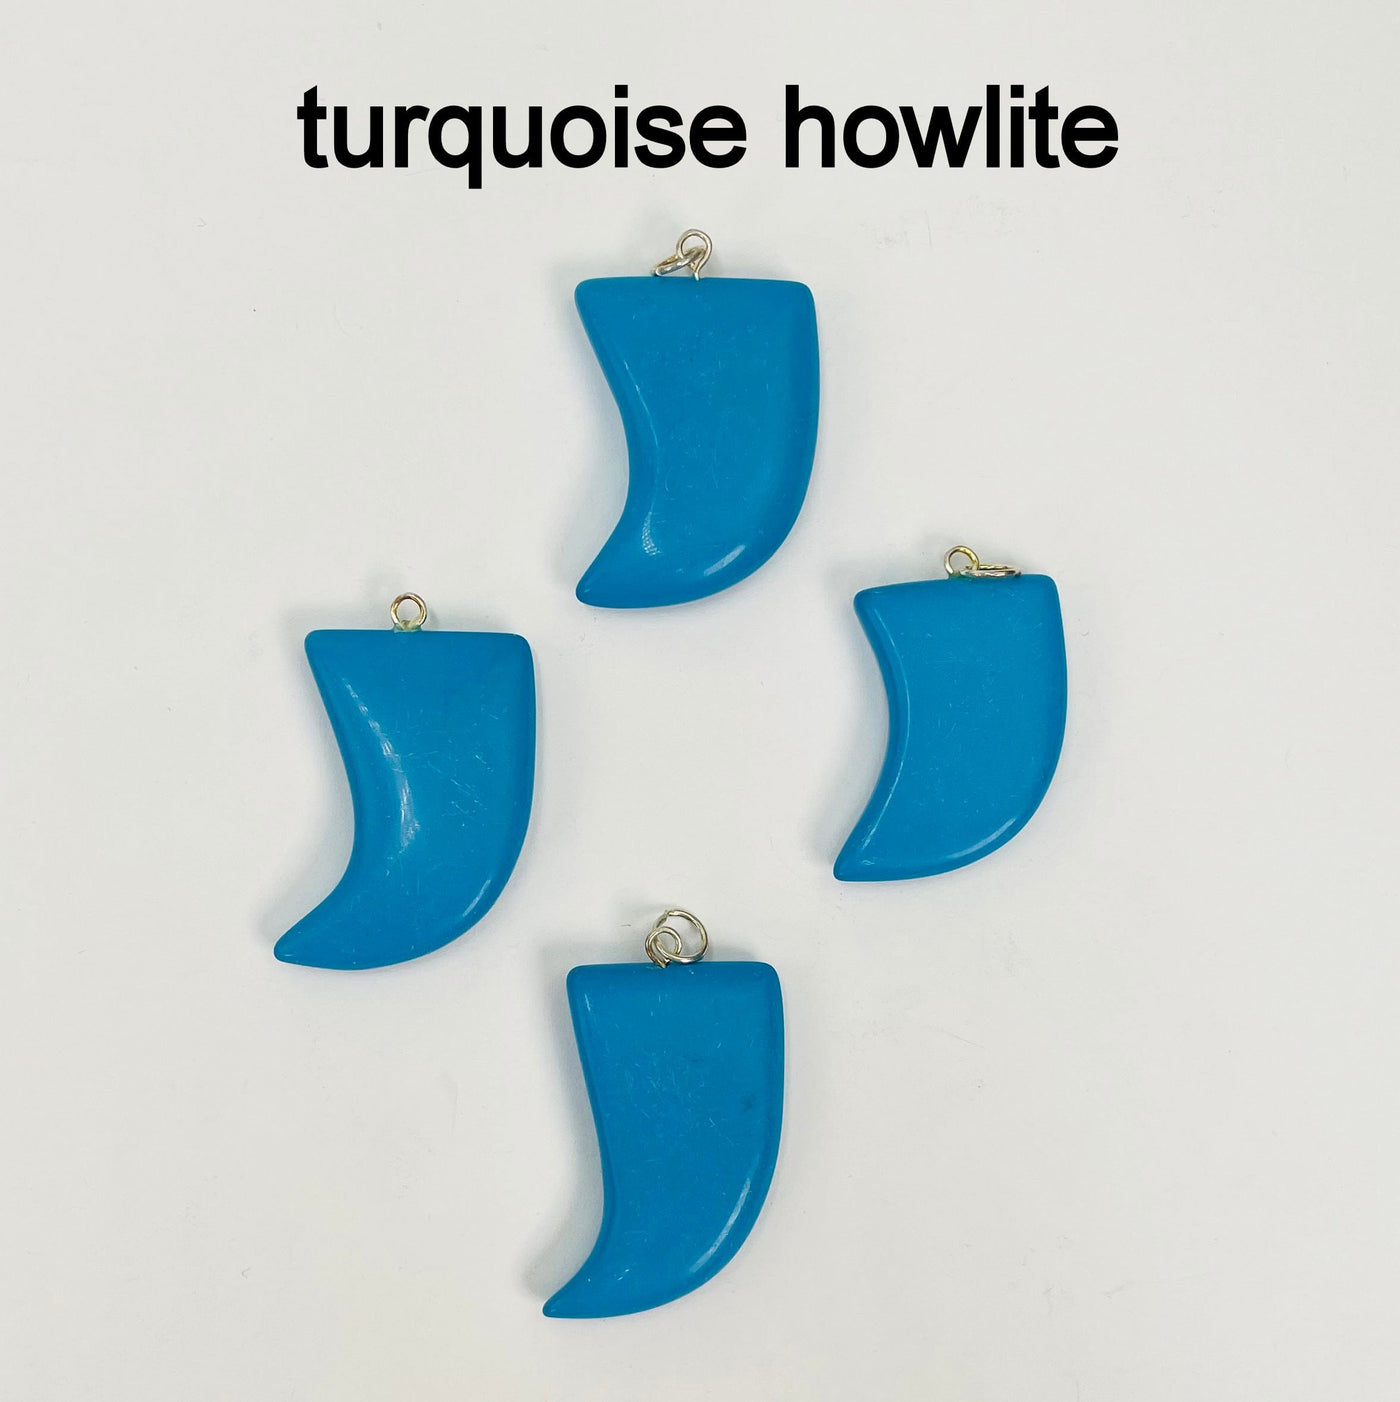 close up of four tumbled turquoise howlite horn pendants on white background for details and possible variations